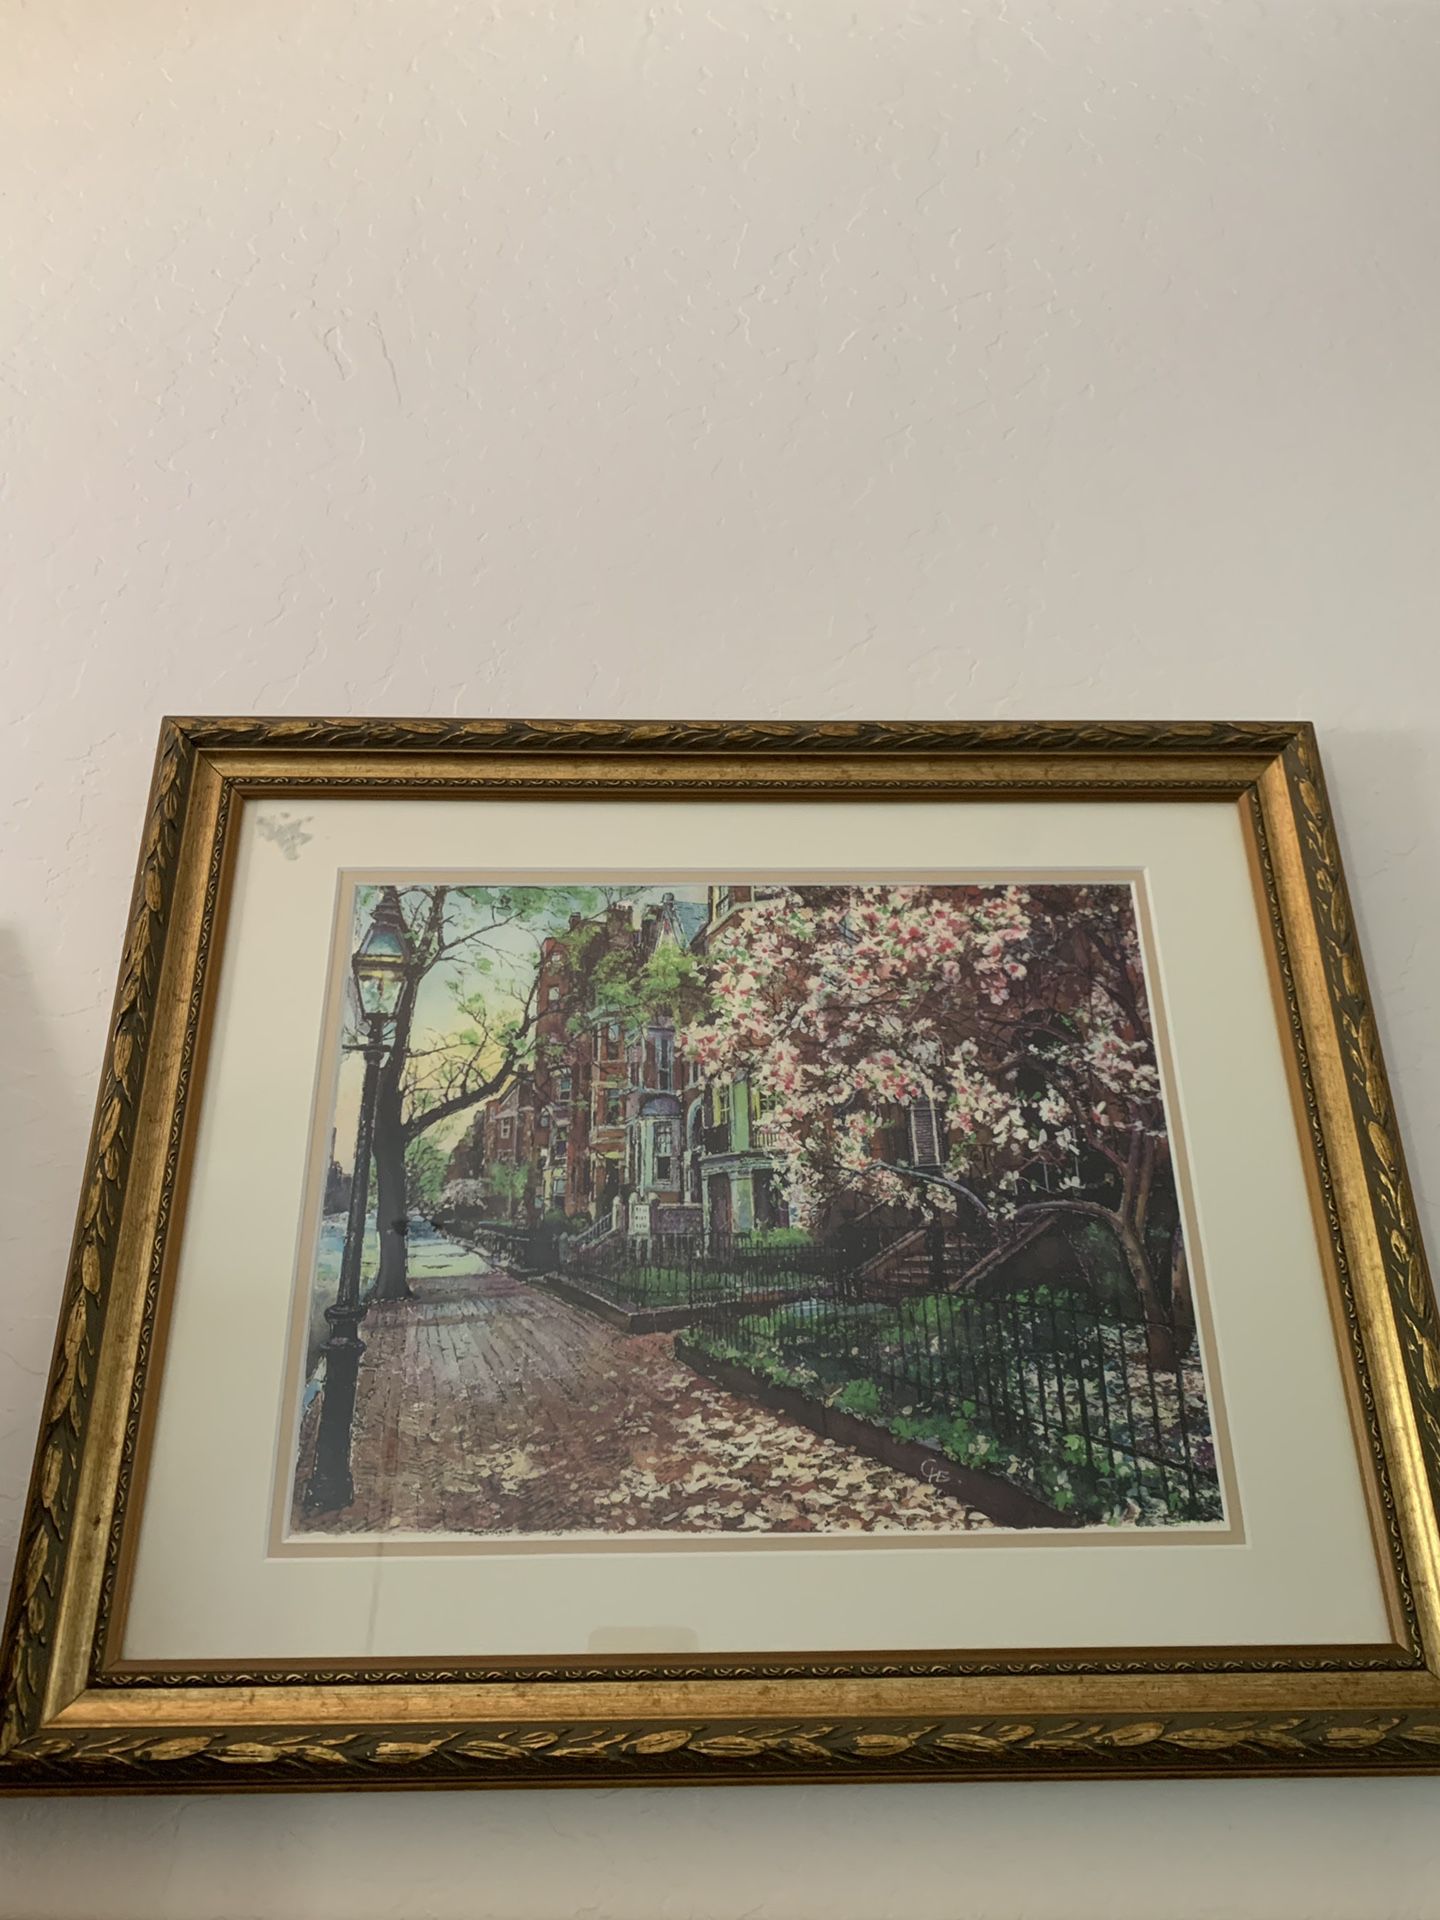 Beautiful painting frame discounted!